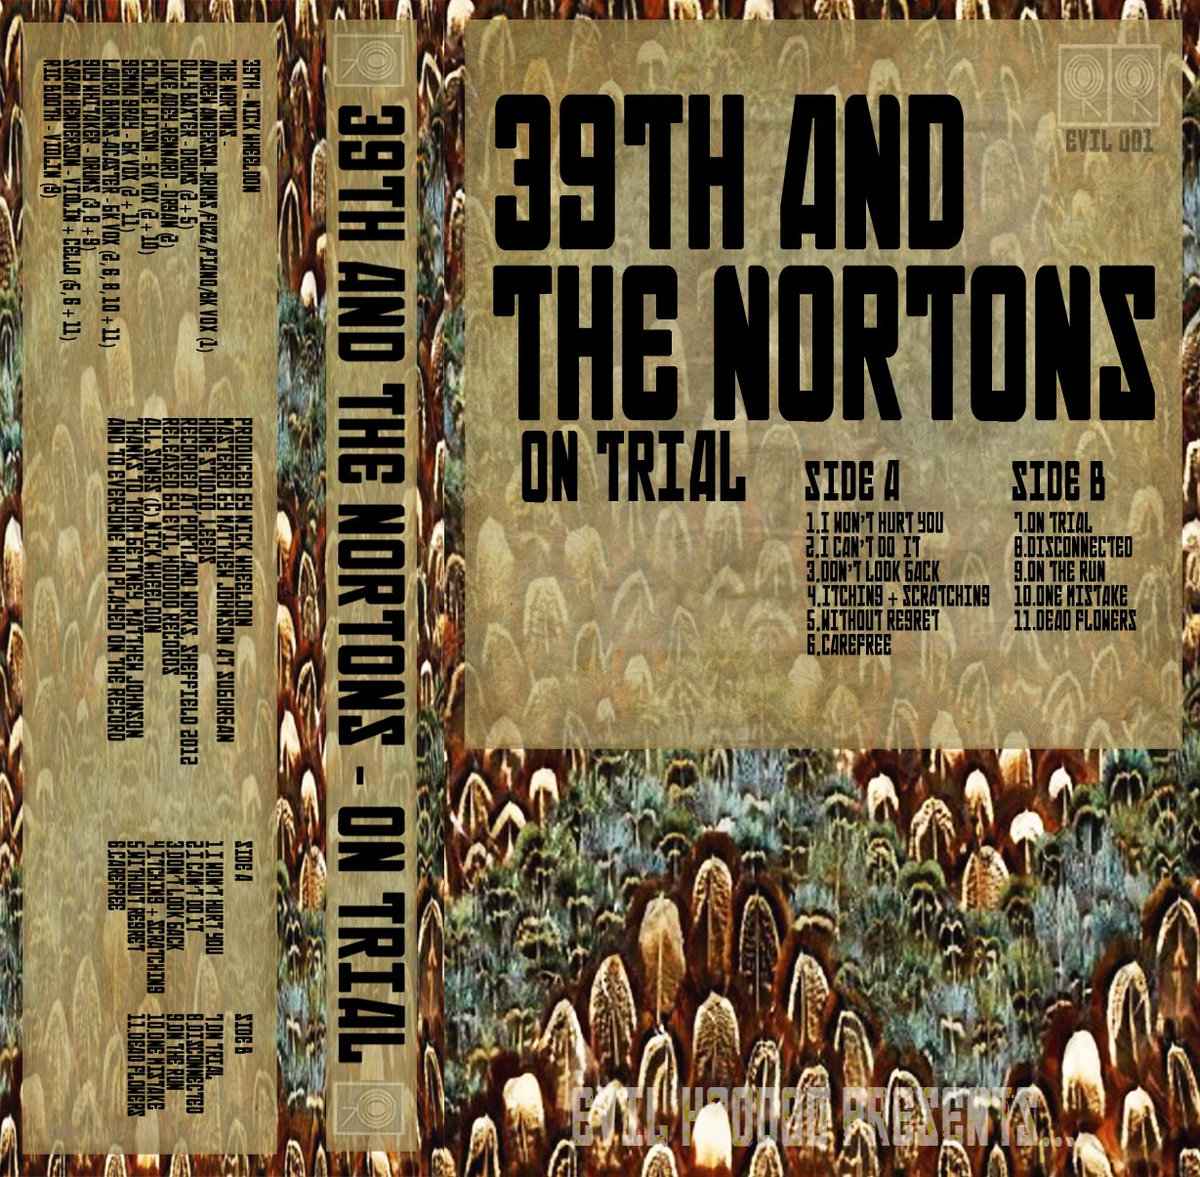 39th and the Nortons On Trial